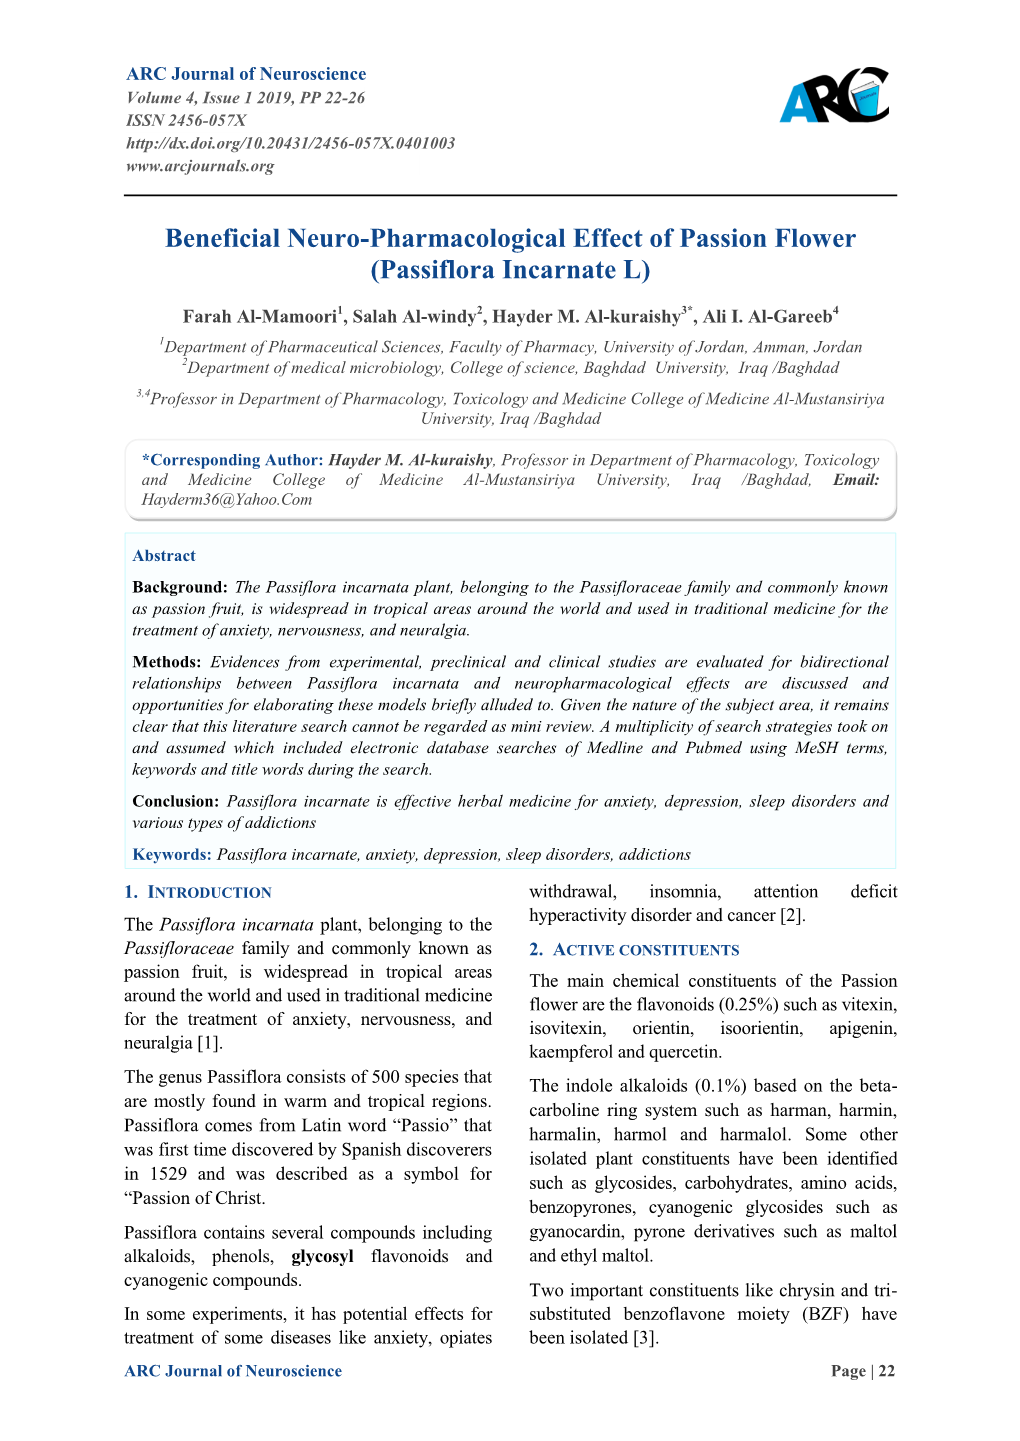 Beneficial Neuro-Pharmacological Effect of Passion Flower (Passiflora Incarnate L)